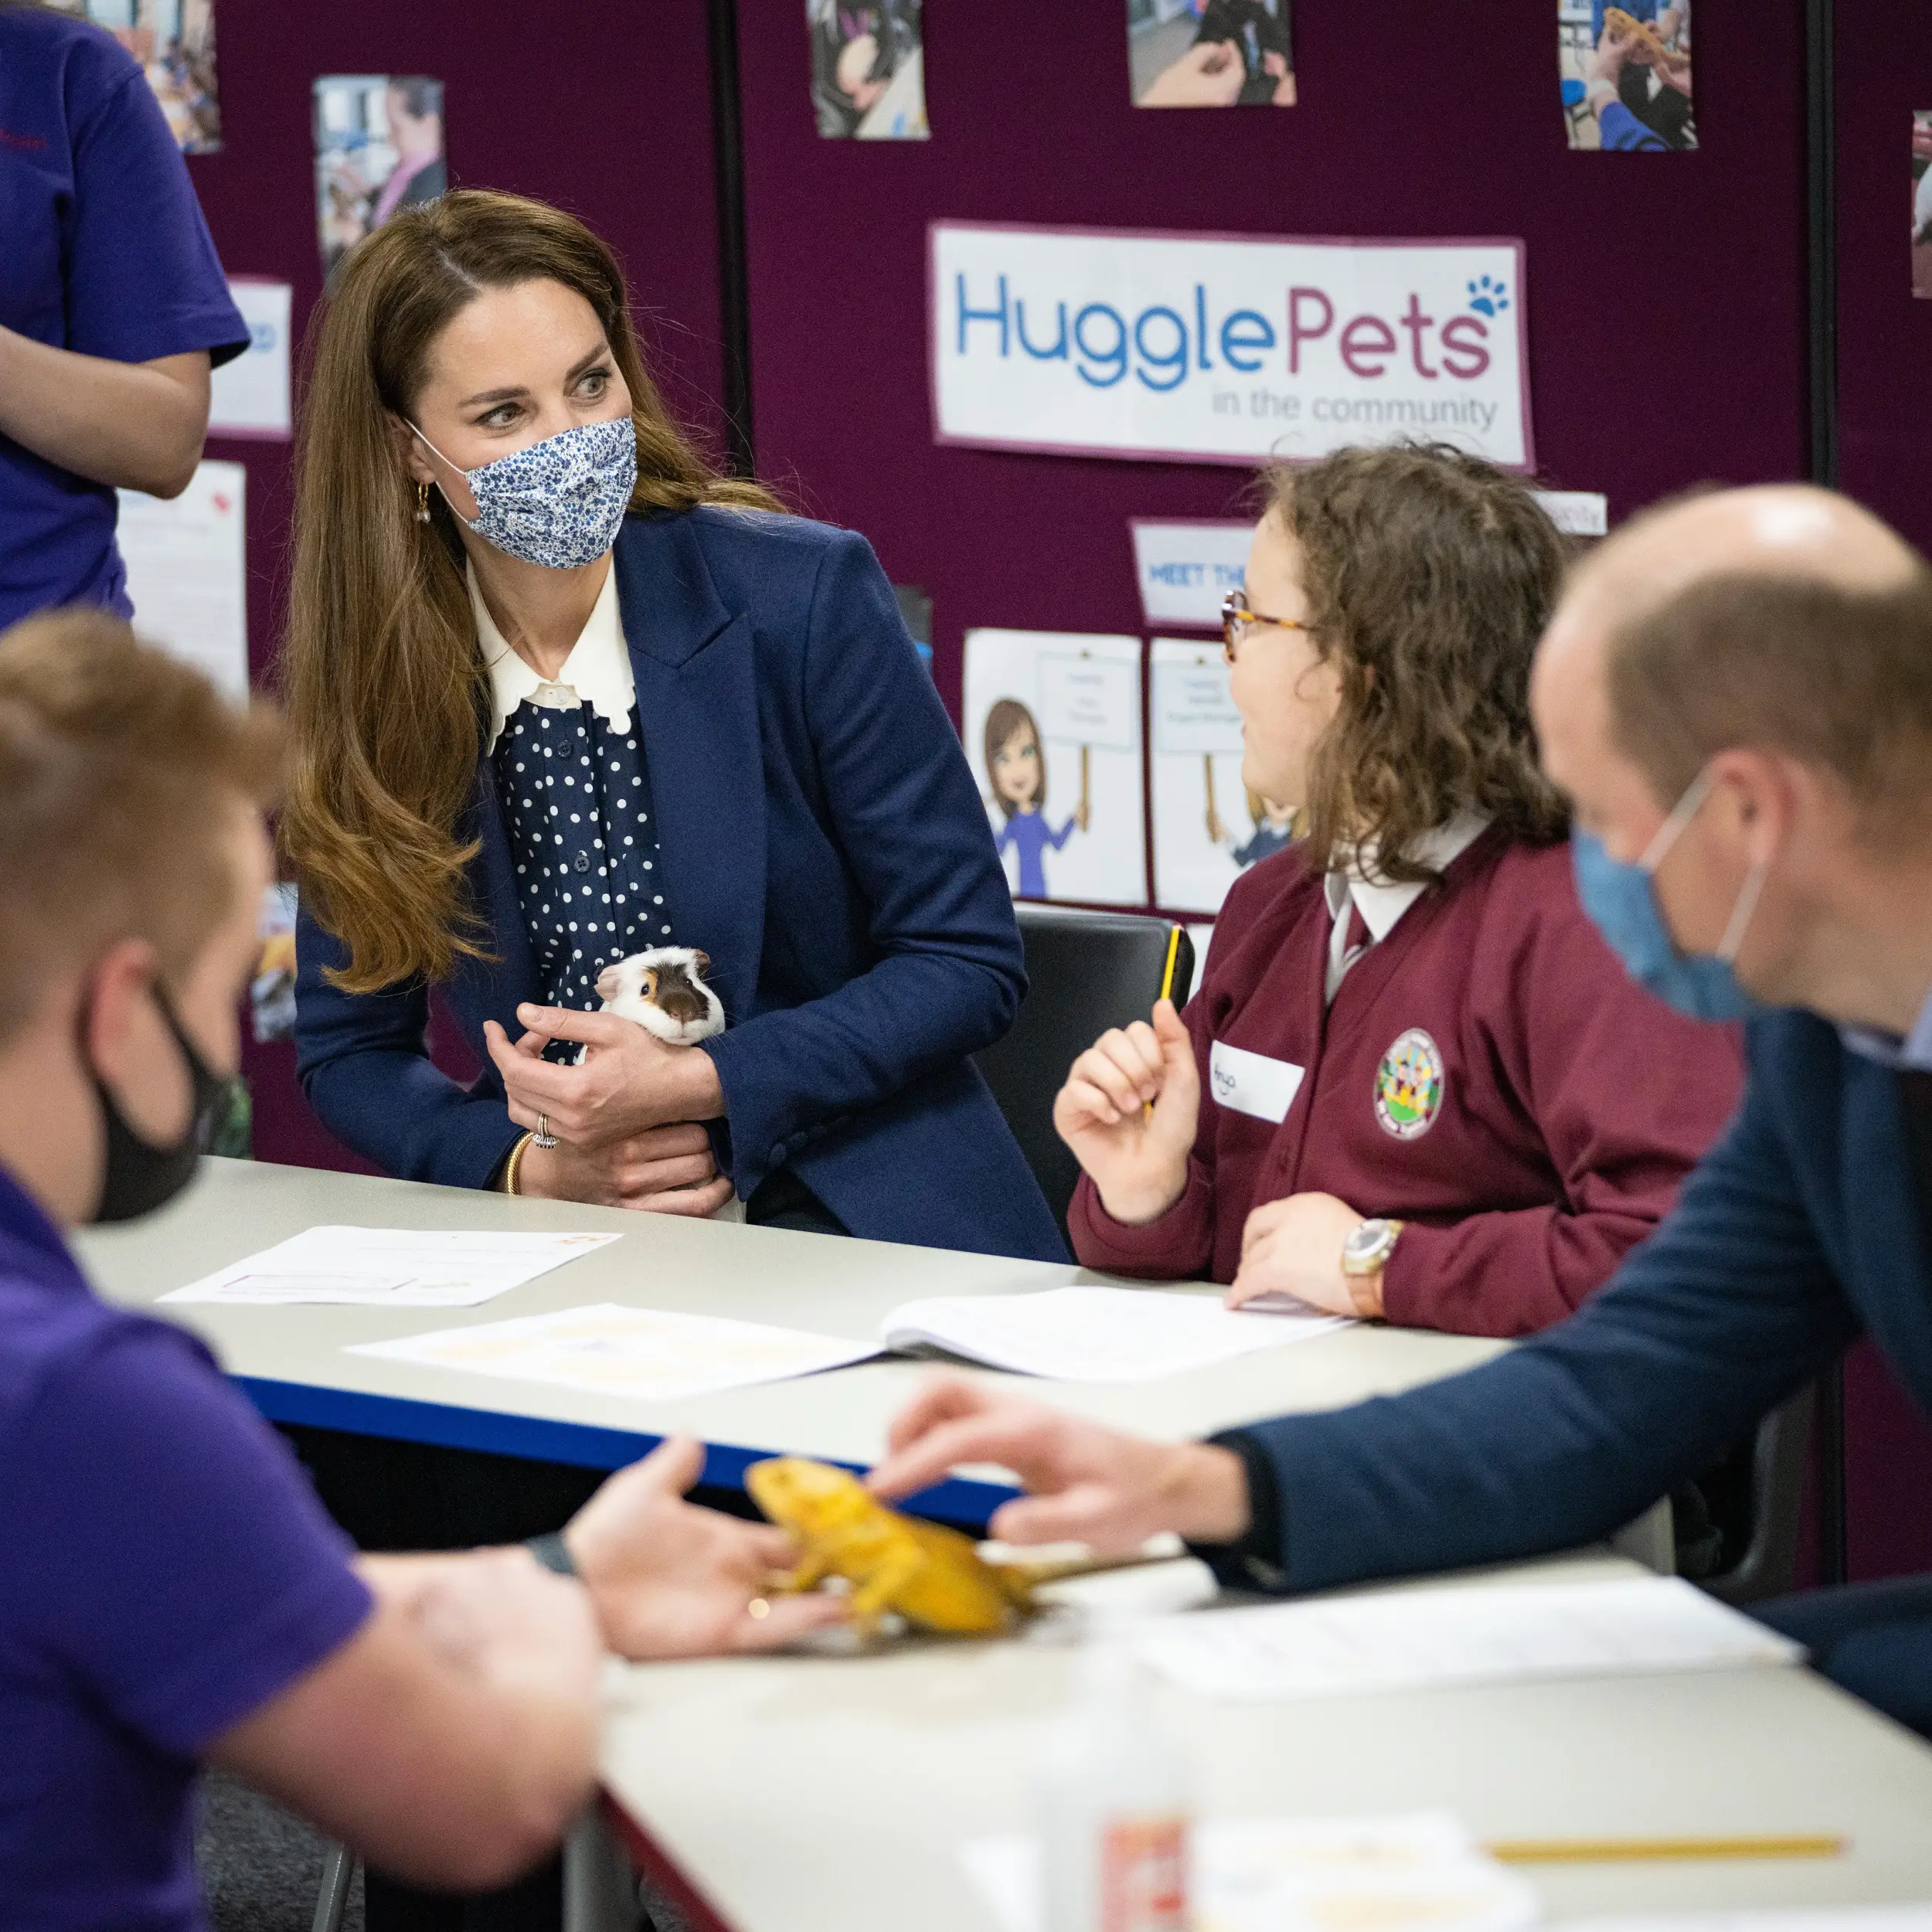 The Duke and Duchess of Cambirdge at the HugglePets at Loxdale primary school